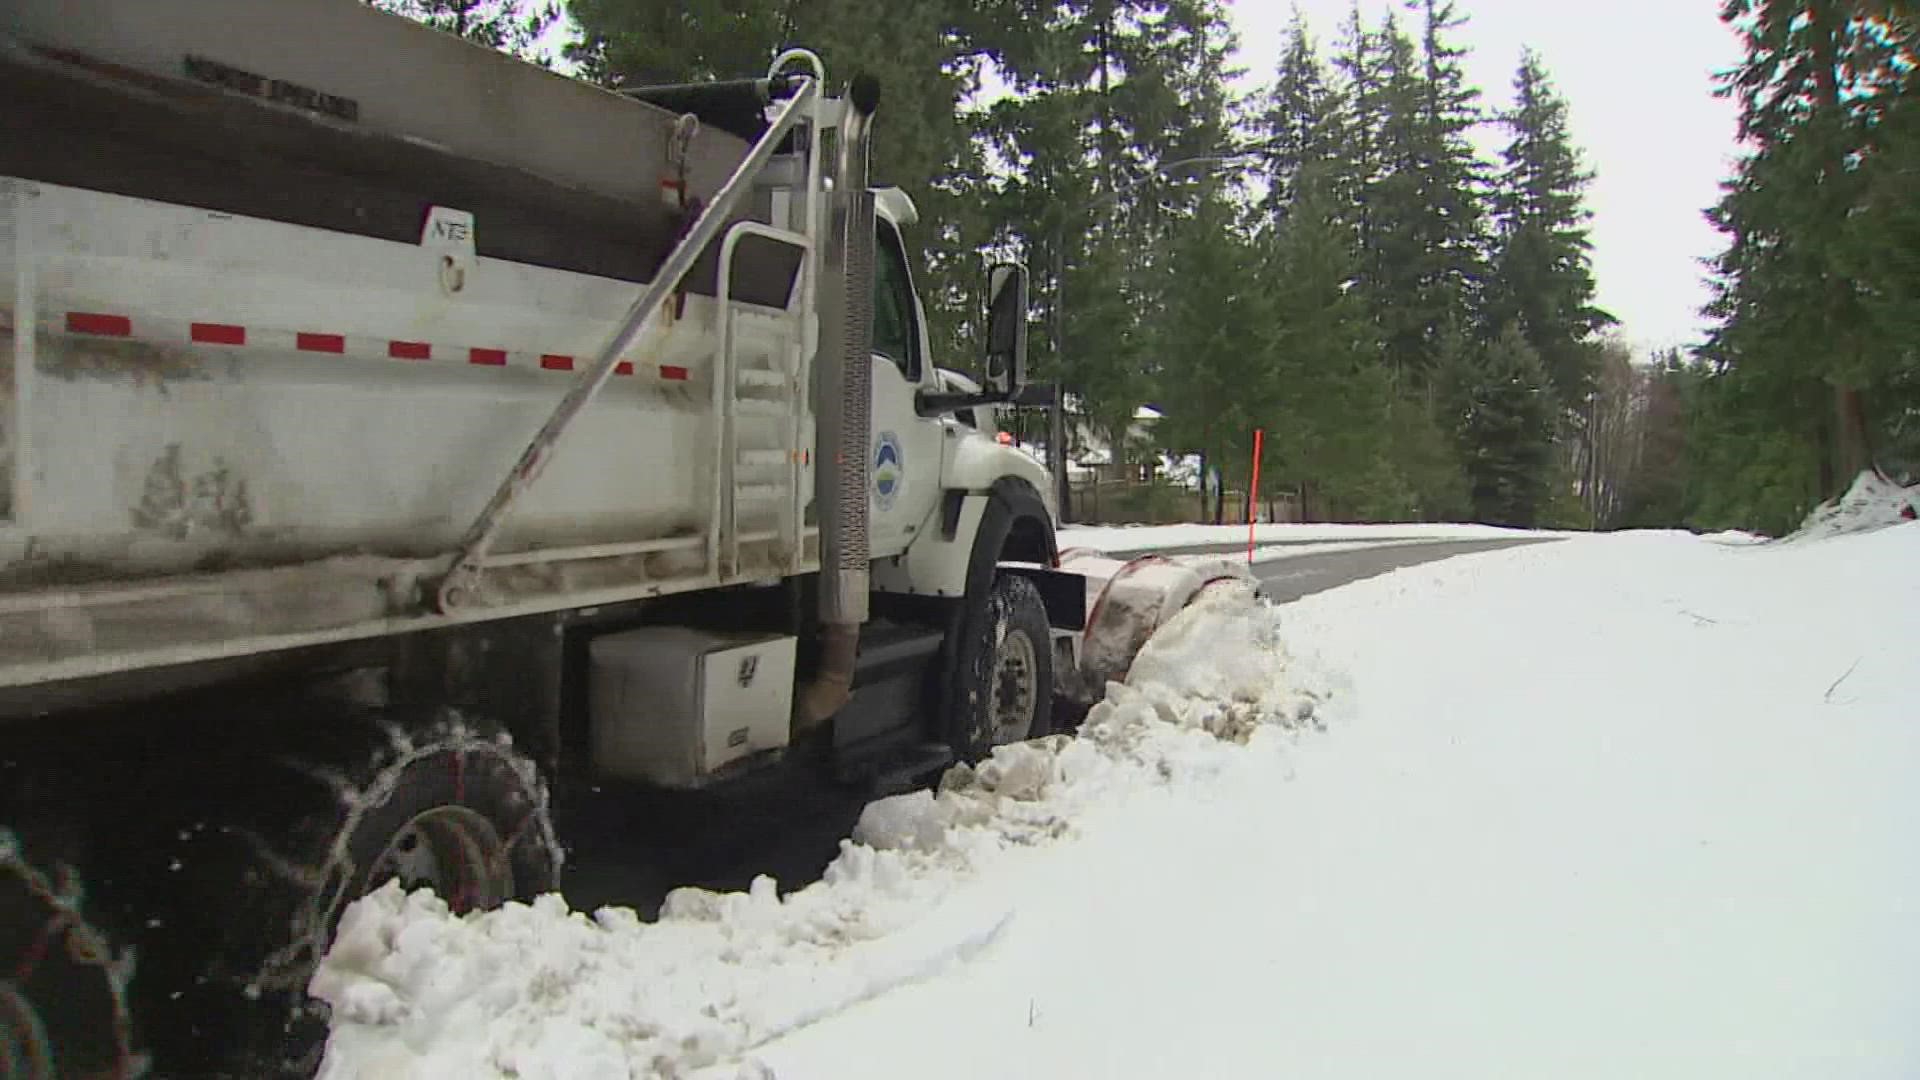 Nearly two months of rain, floods and snow have been relentless for snowplow drivers and mail delivery drivers in Whatcom County.